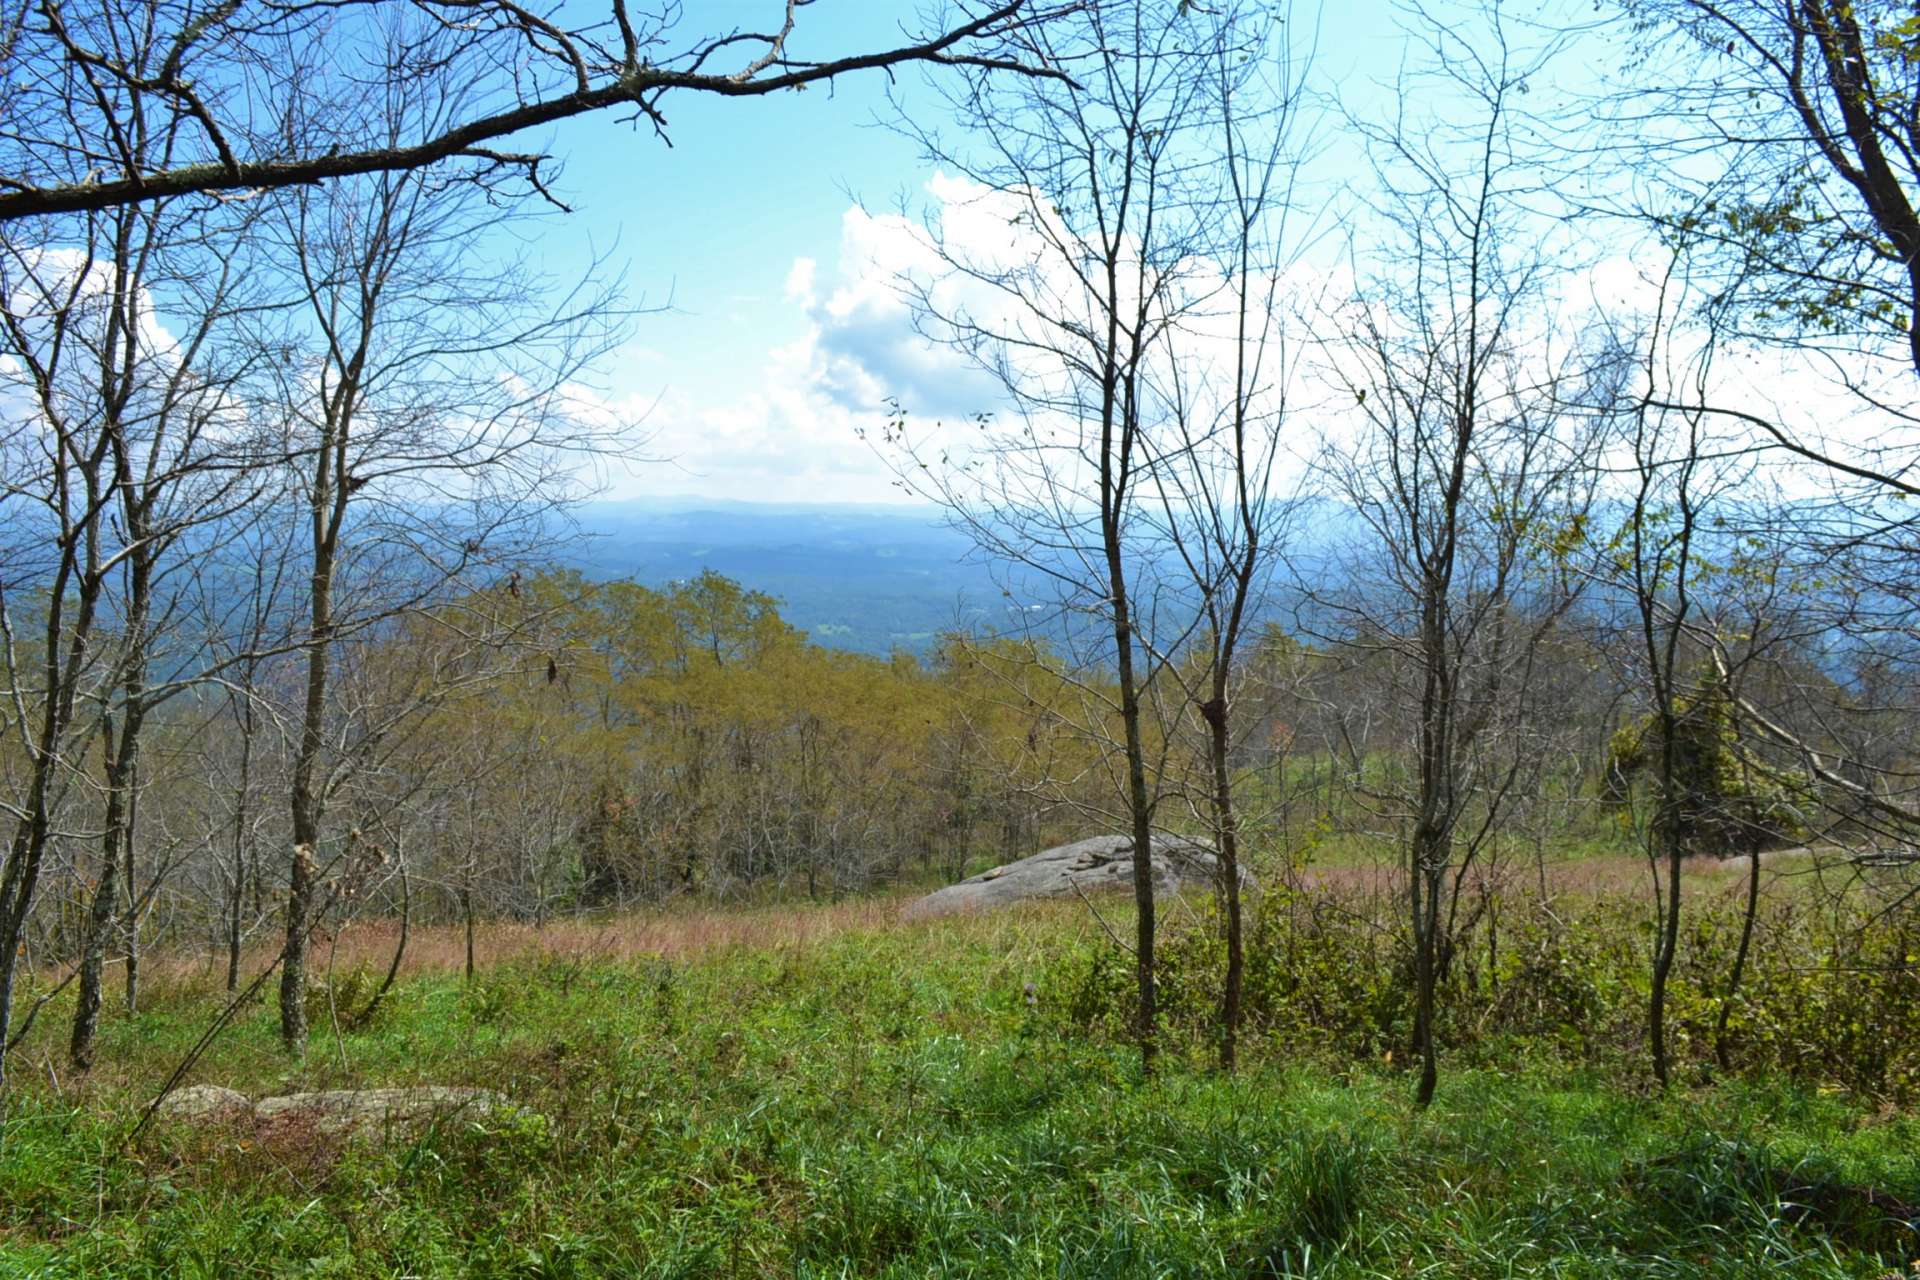 Offered at $98,000, Lot T5, of Point Lookout Mountain, offers the ideal location for your Grayson County VA mountain retreat or primary residence.  Point Lookout is a gated community featuring estate sized tracts, paved streets, underground utilities, natural areas for hiking, abundant wildlife,  and fantastic panoramic layered mountain vista views.  The location is convenient to shopping in Independence, Galax and Wytheville, National Forest areas, and the New River.<p>  If loving where you live is most important of all, then this is the perfect place to experience mountain living in peace and tranquility.  S272   Priced way below tax value!